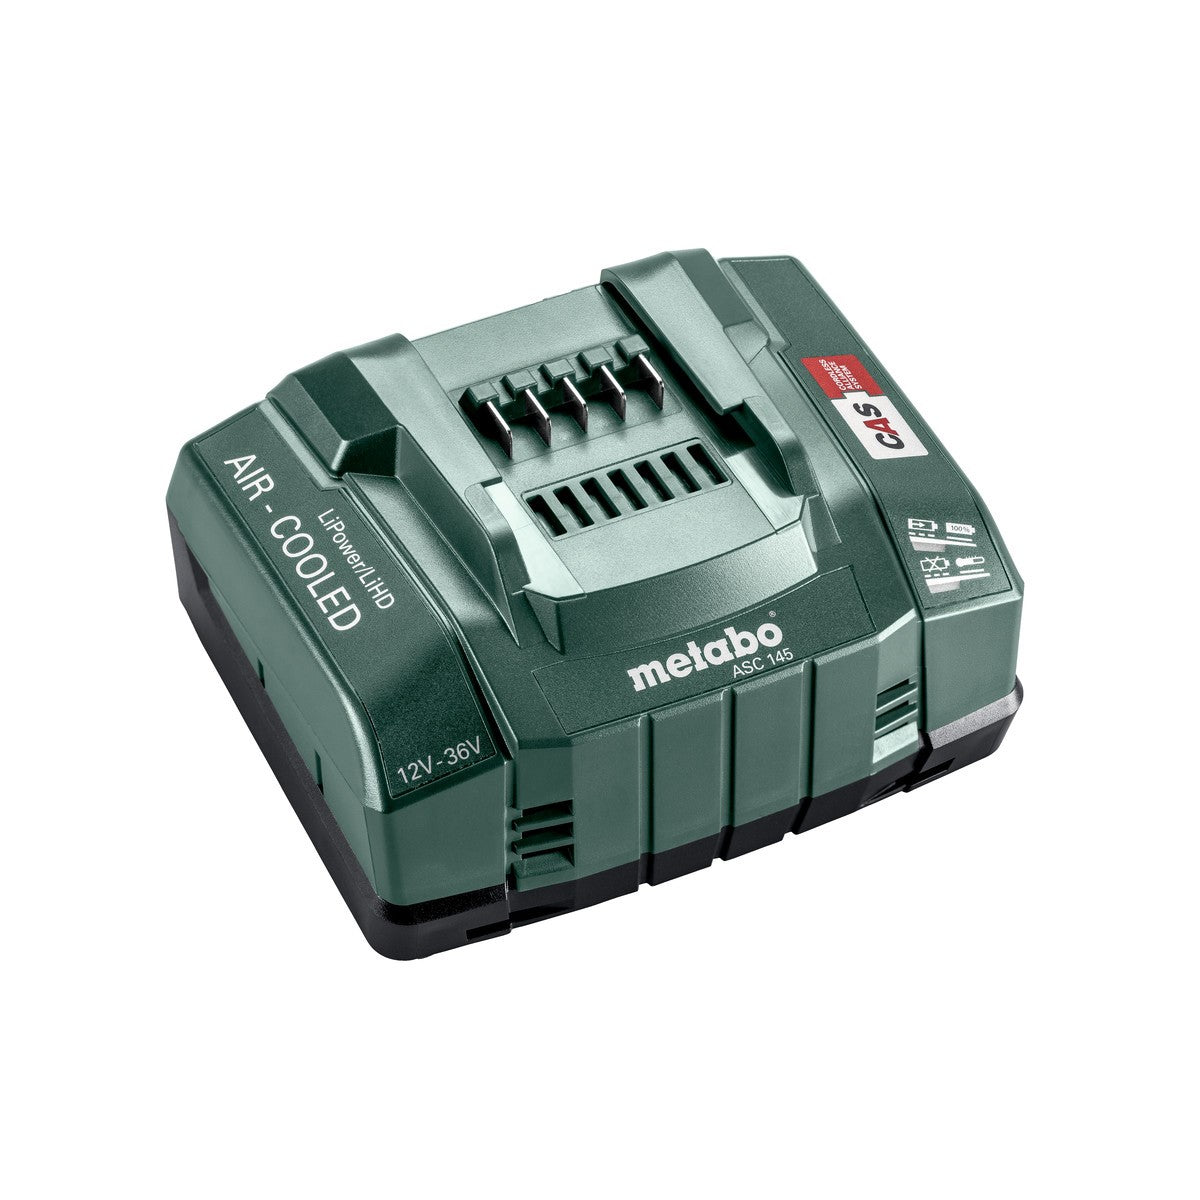 Metabo ASC Air Cooled Charger 145, 12-36 Volt (627380000)